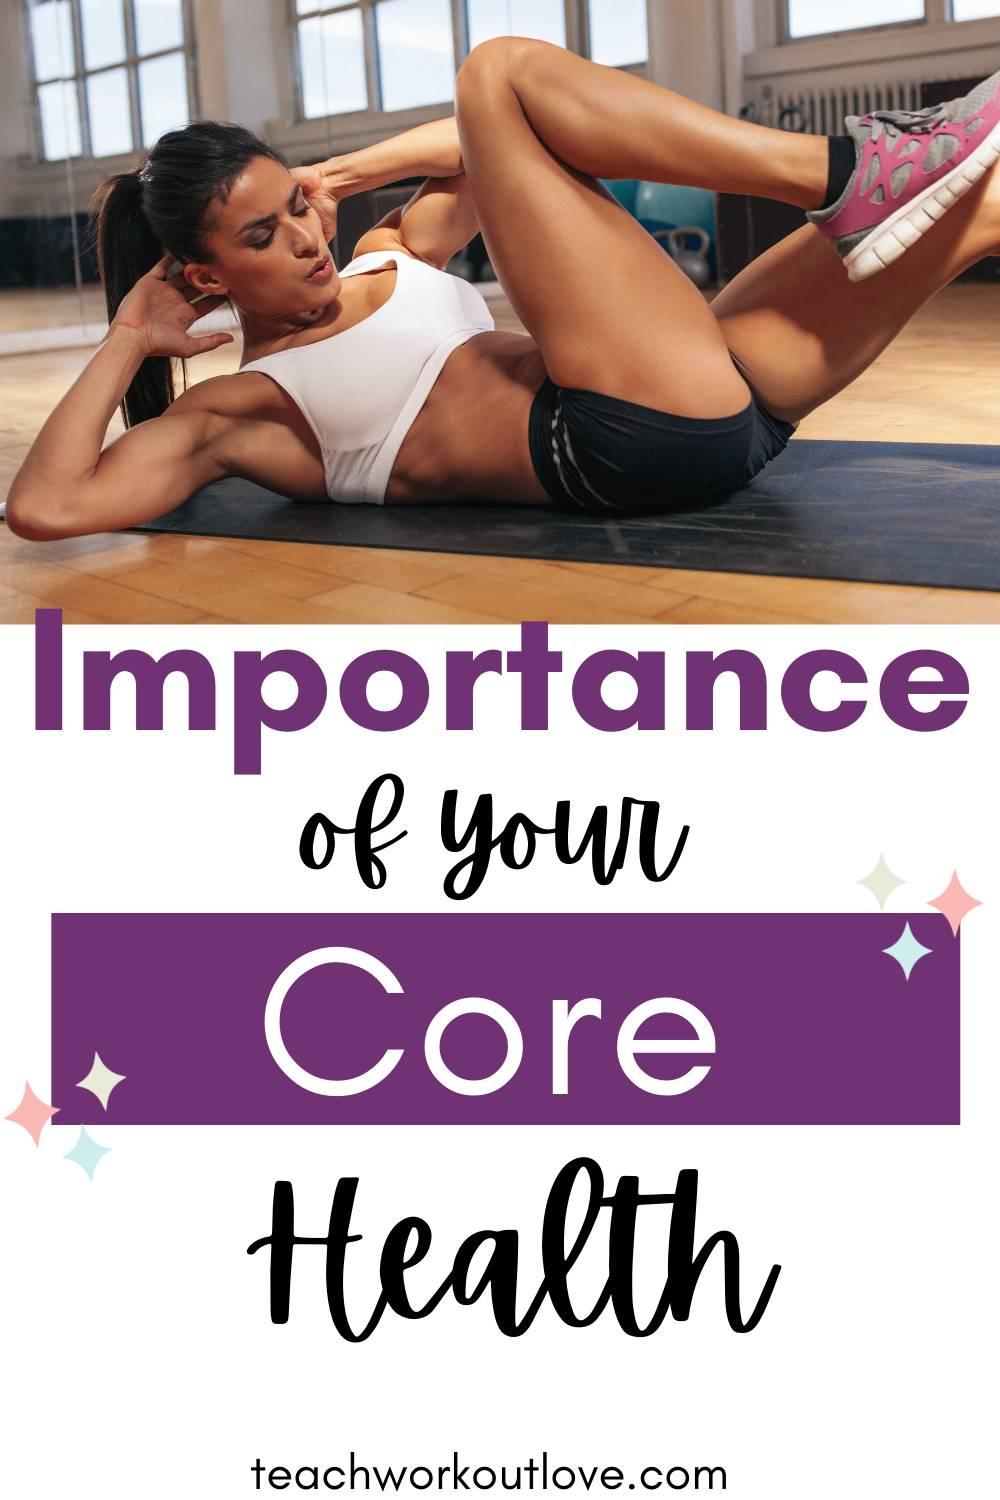 To make this easier for you, we’ve unpacked three great exercises that help you establish core health, at any age.